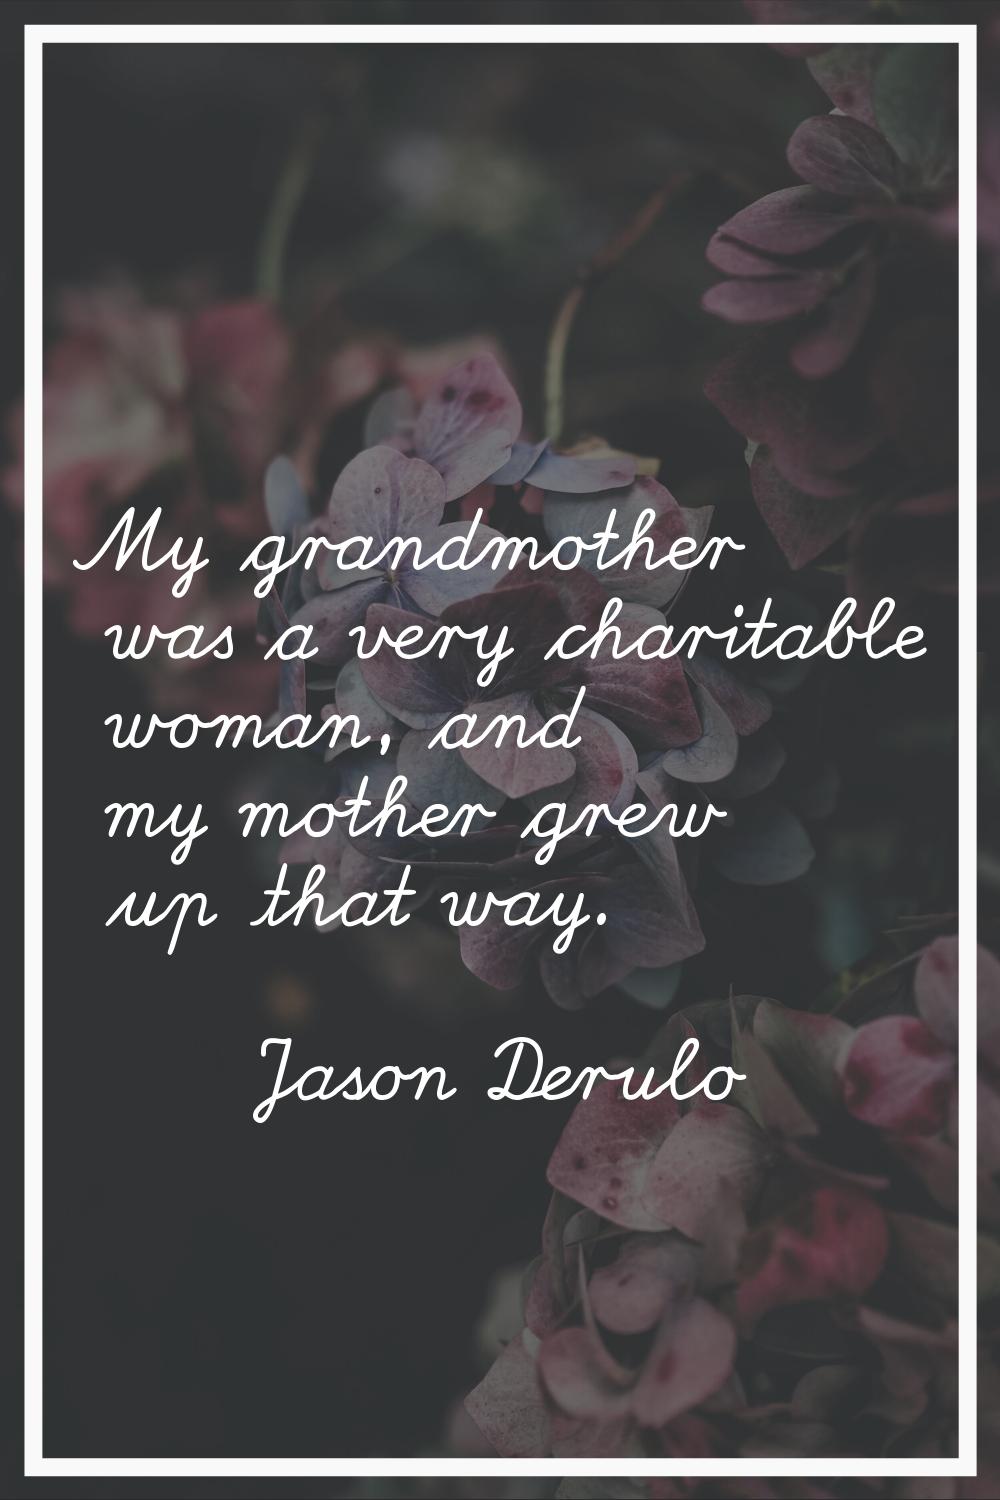 My grandmother was a very charitable woman, and my mother grew up that way.